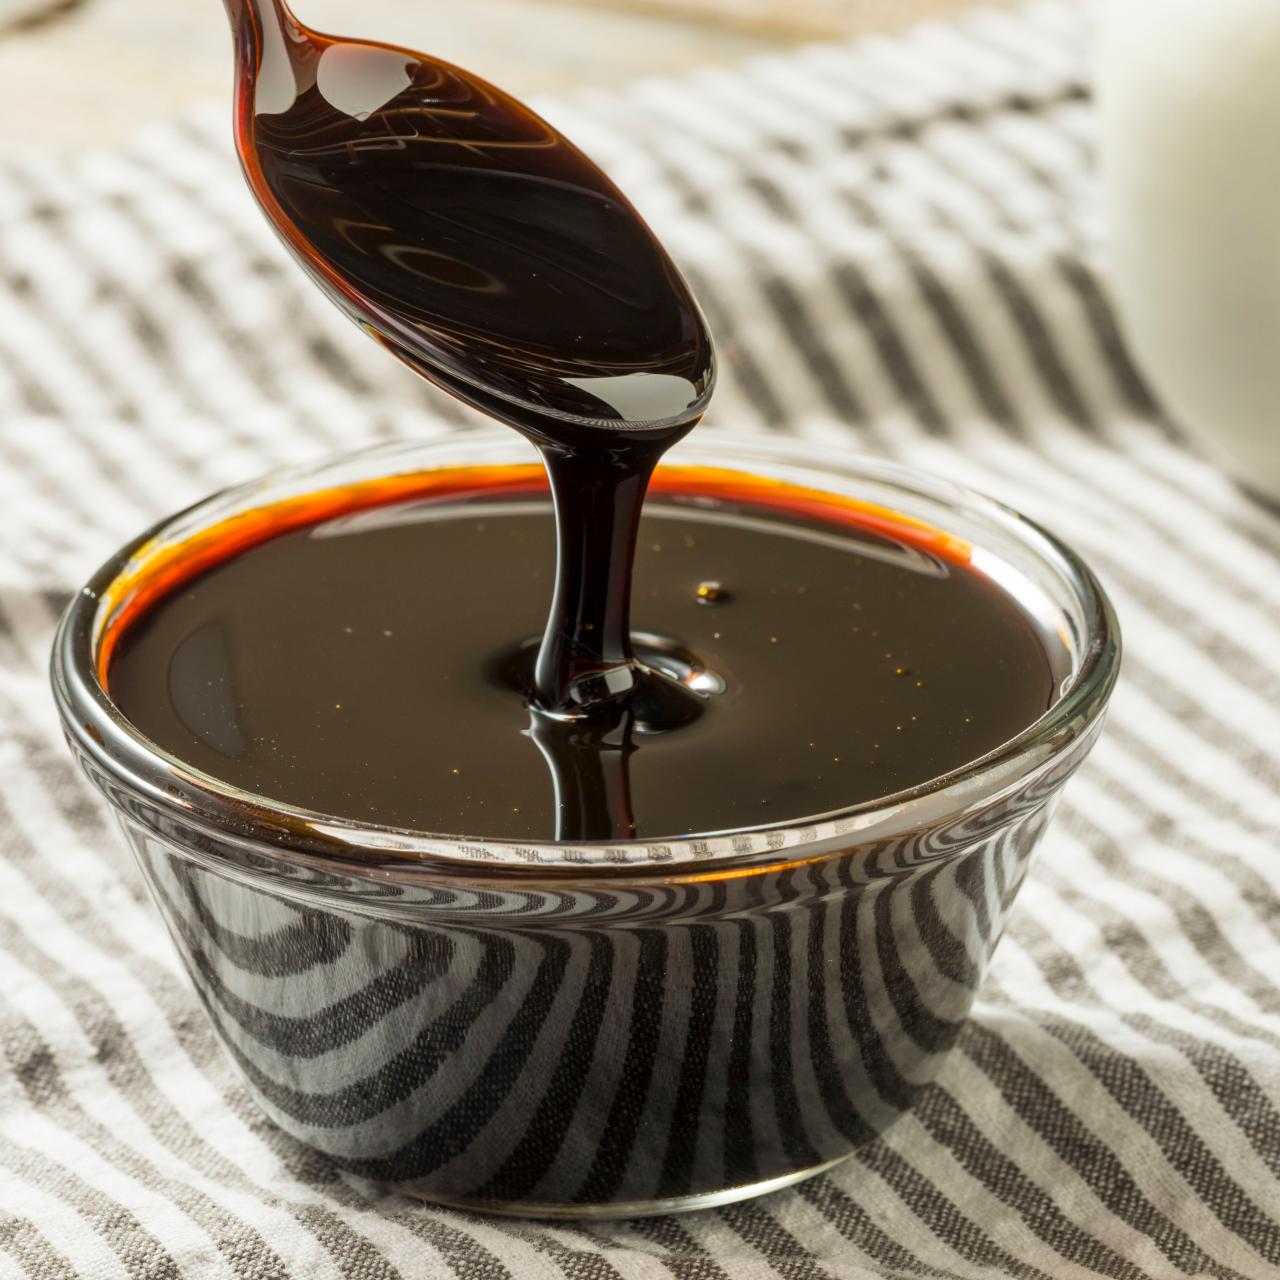 where does molasses come from